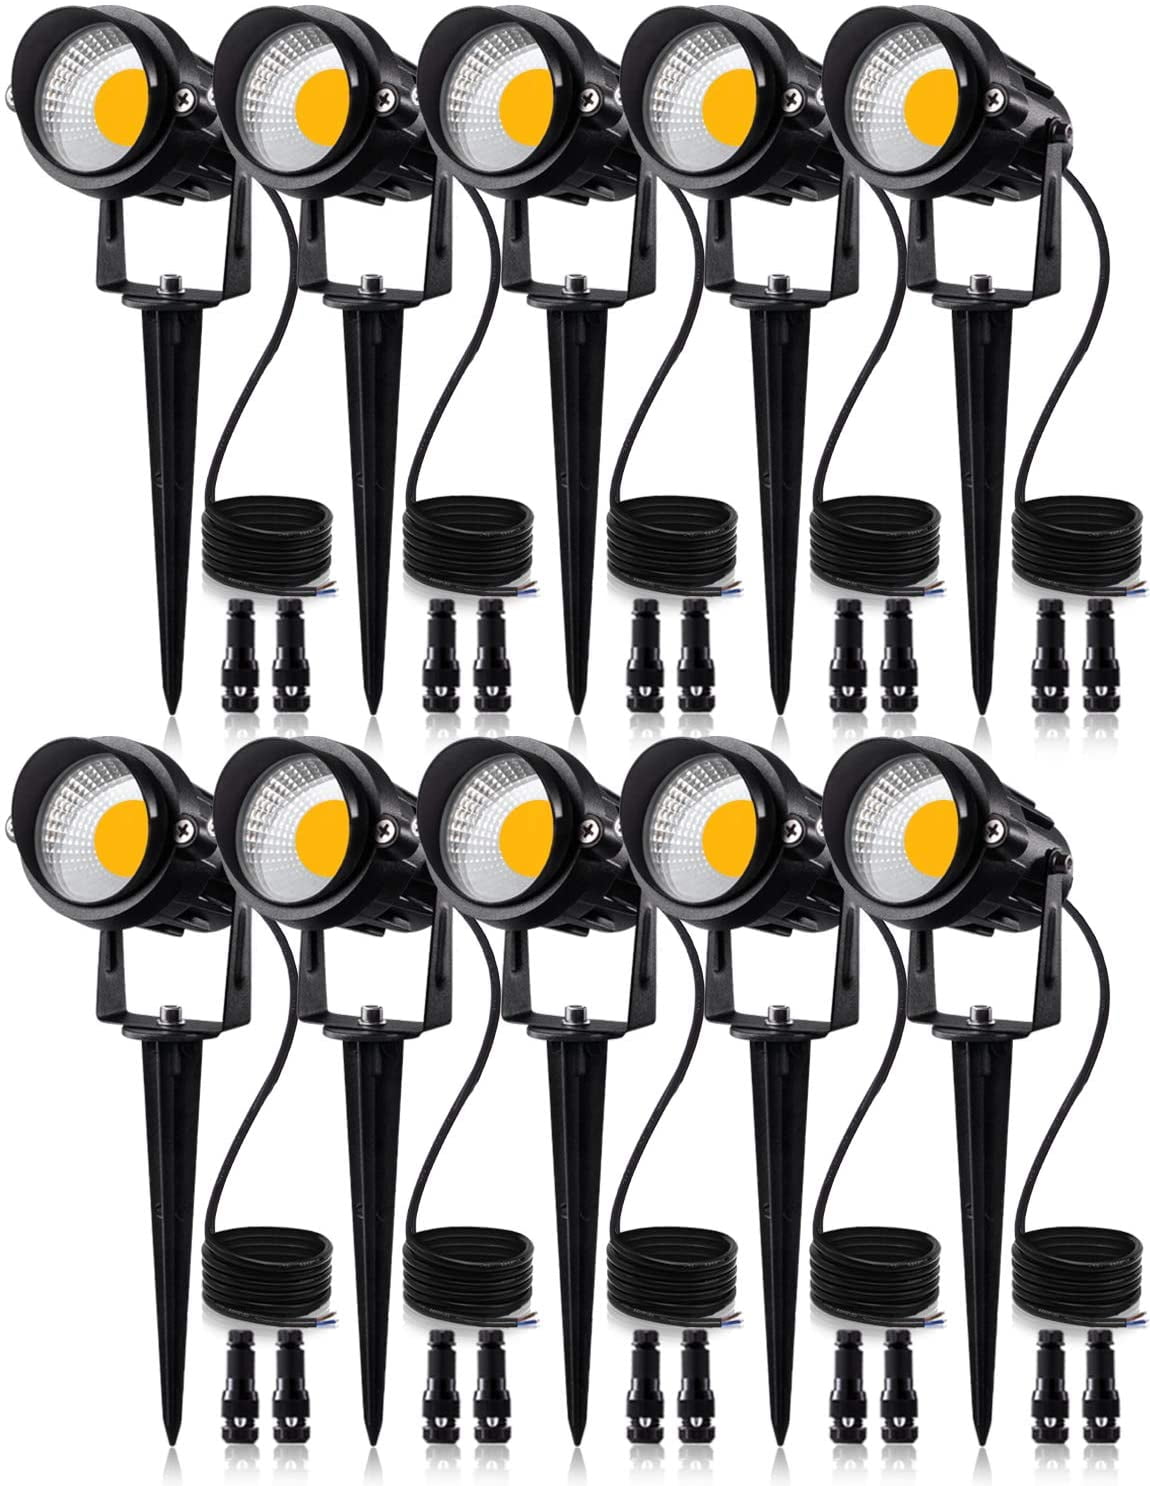 SUNVIE 12W Low Voltage LED Landscape Lights with Connectors, Outdoor 12V  Super Warm White (900LM) Waterproof Garden Pathway Lights Wall Tree Flag  Spotlights with Spike Stand (10 Pack with Connector)